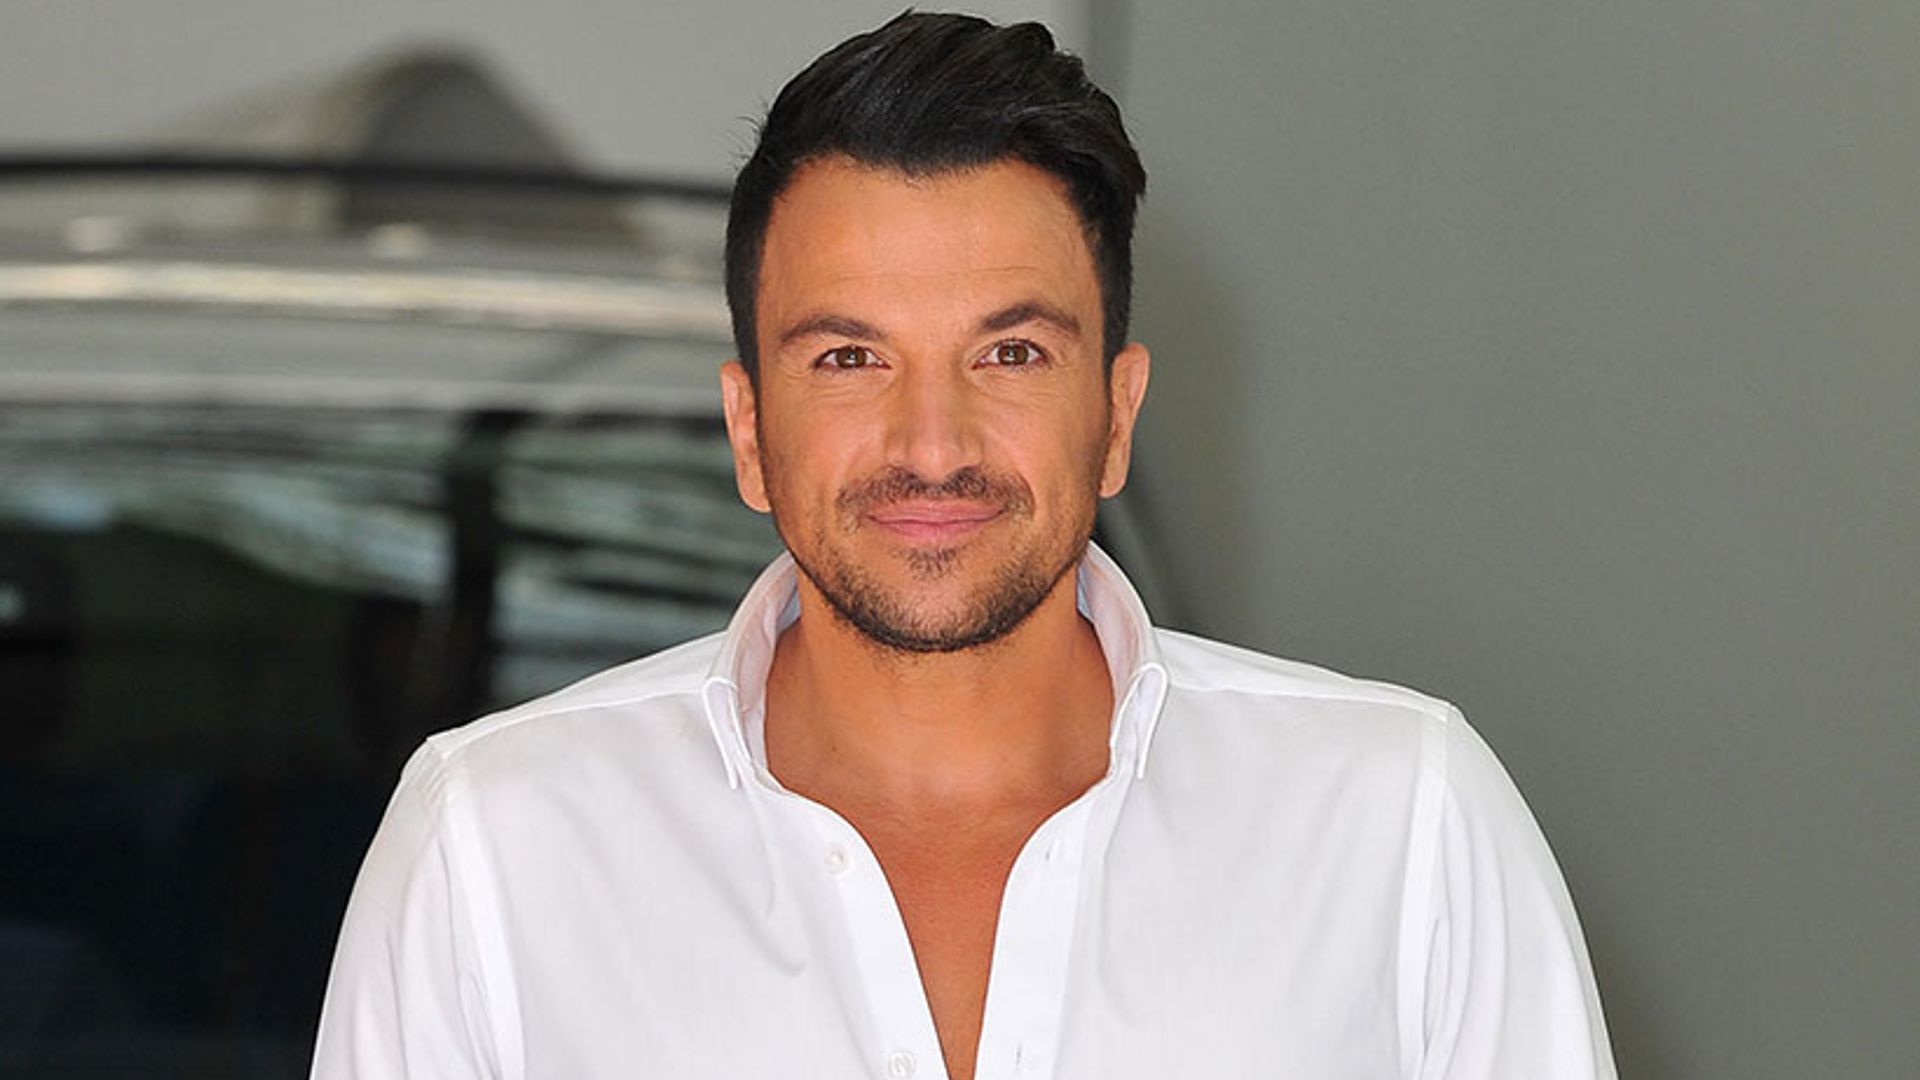 Peter Andre delights fans with retro hair look | HELLO!